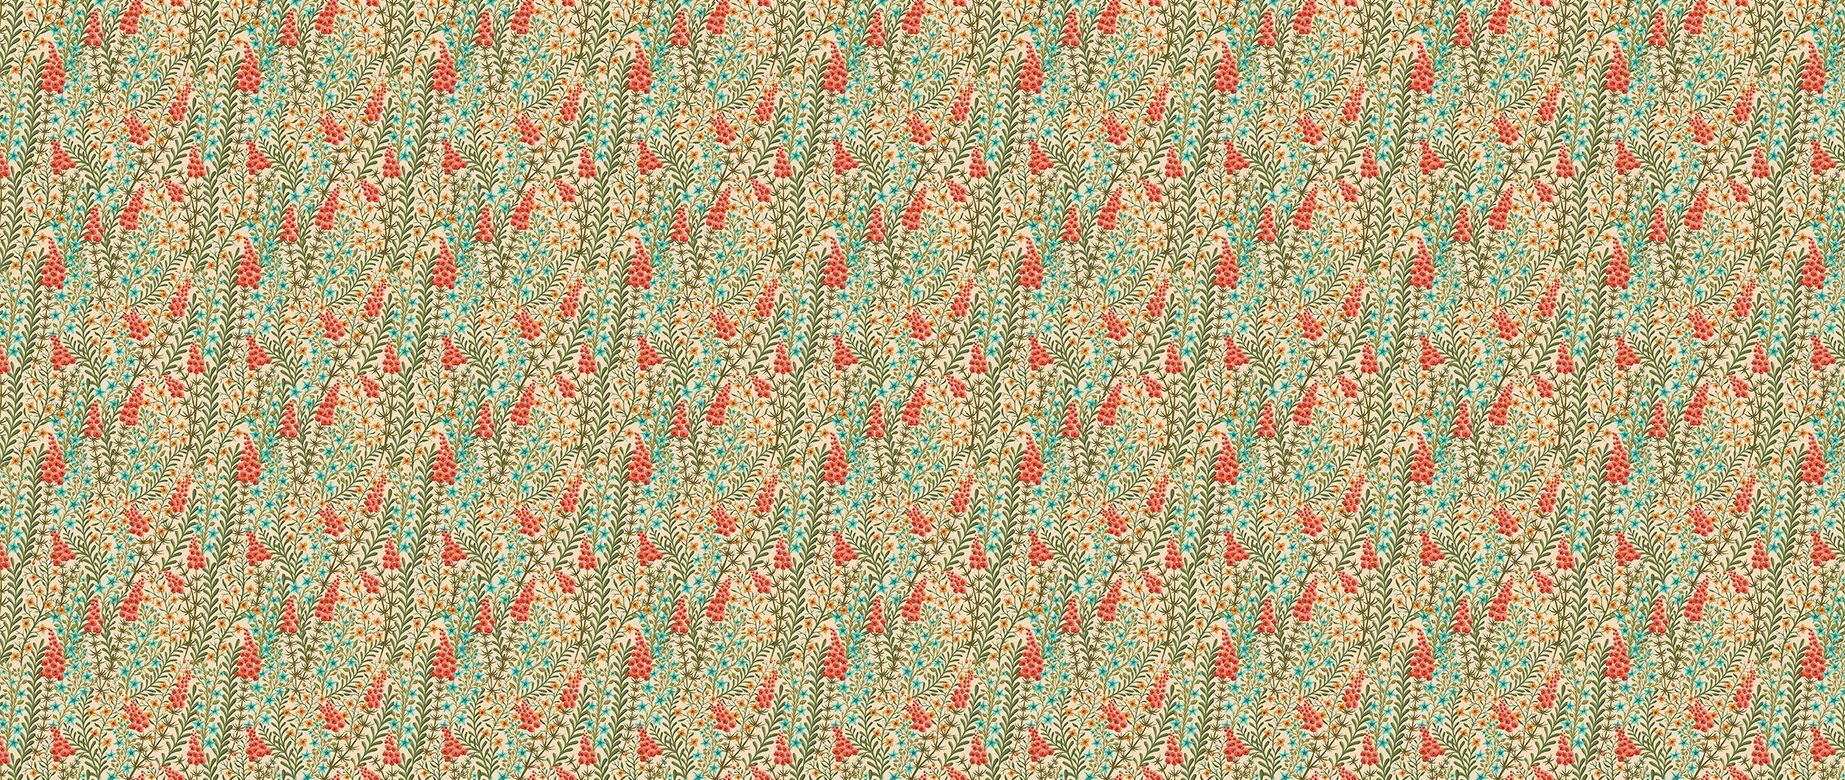 little-flowers-and-leaves-pattern-wallpapers-full-wide-view